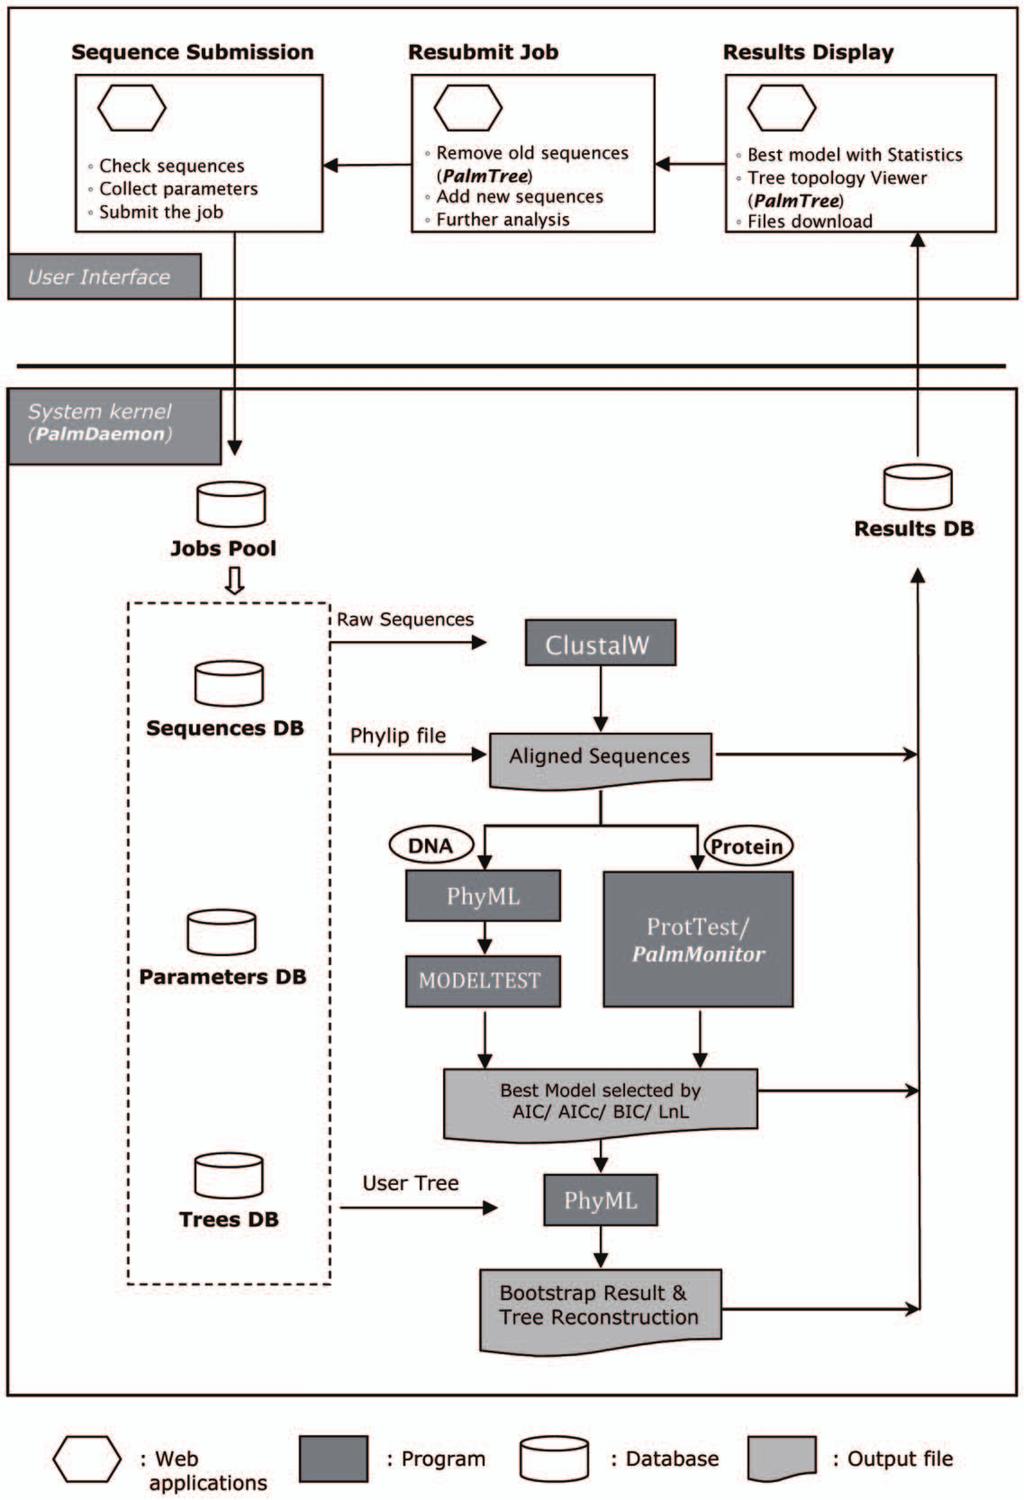 Figure 1. Infrastructure and workflow of. doi:10.1371/journal.pone.0008116.